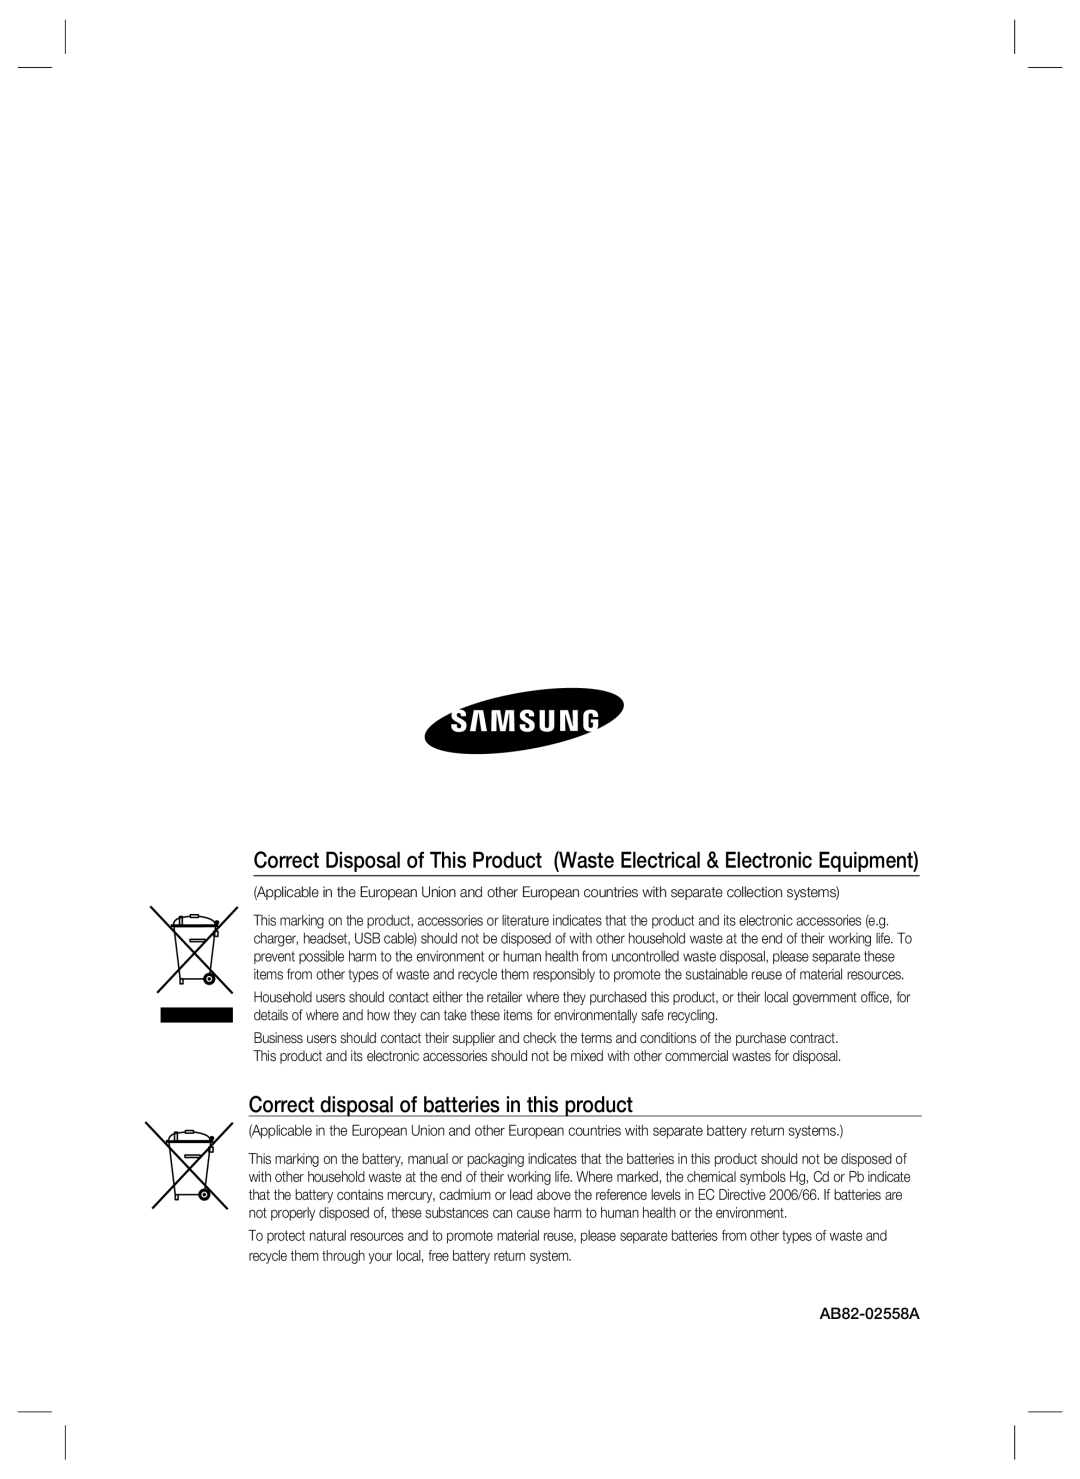 Samsung SSA-S1000 user manual Correct disposal of batteries in this product 